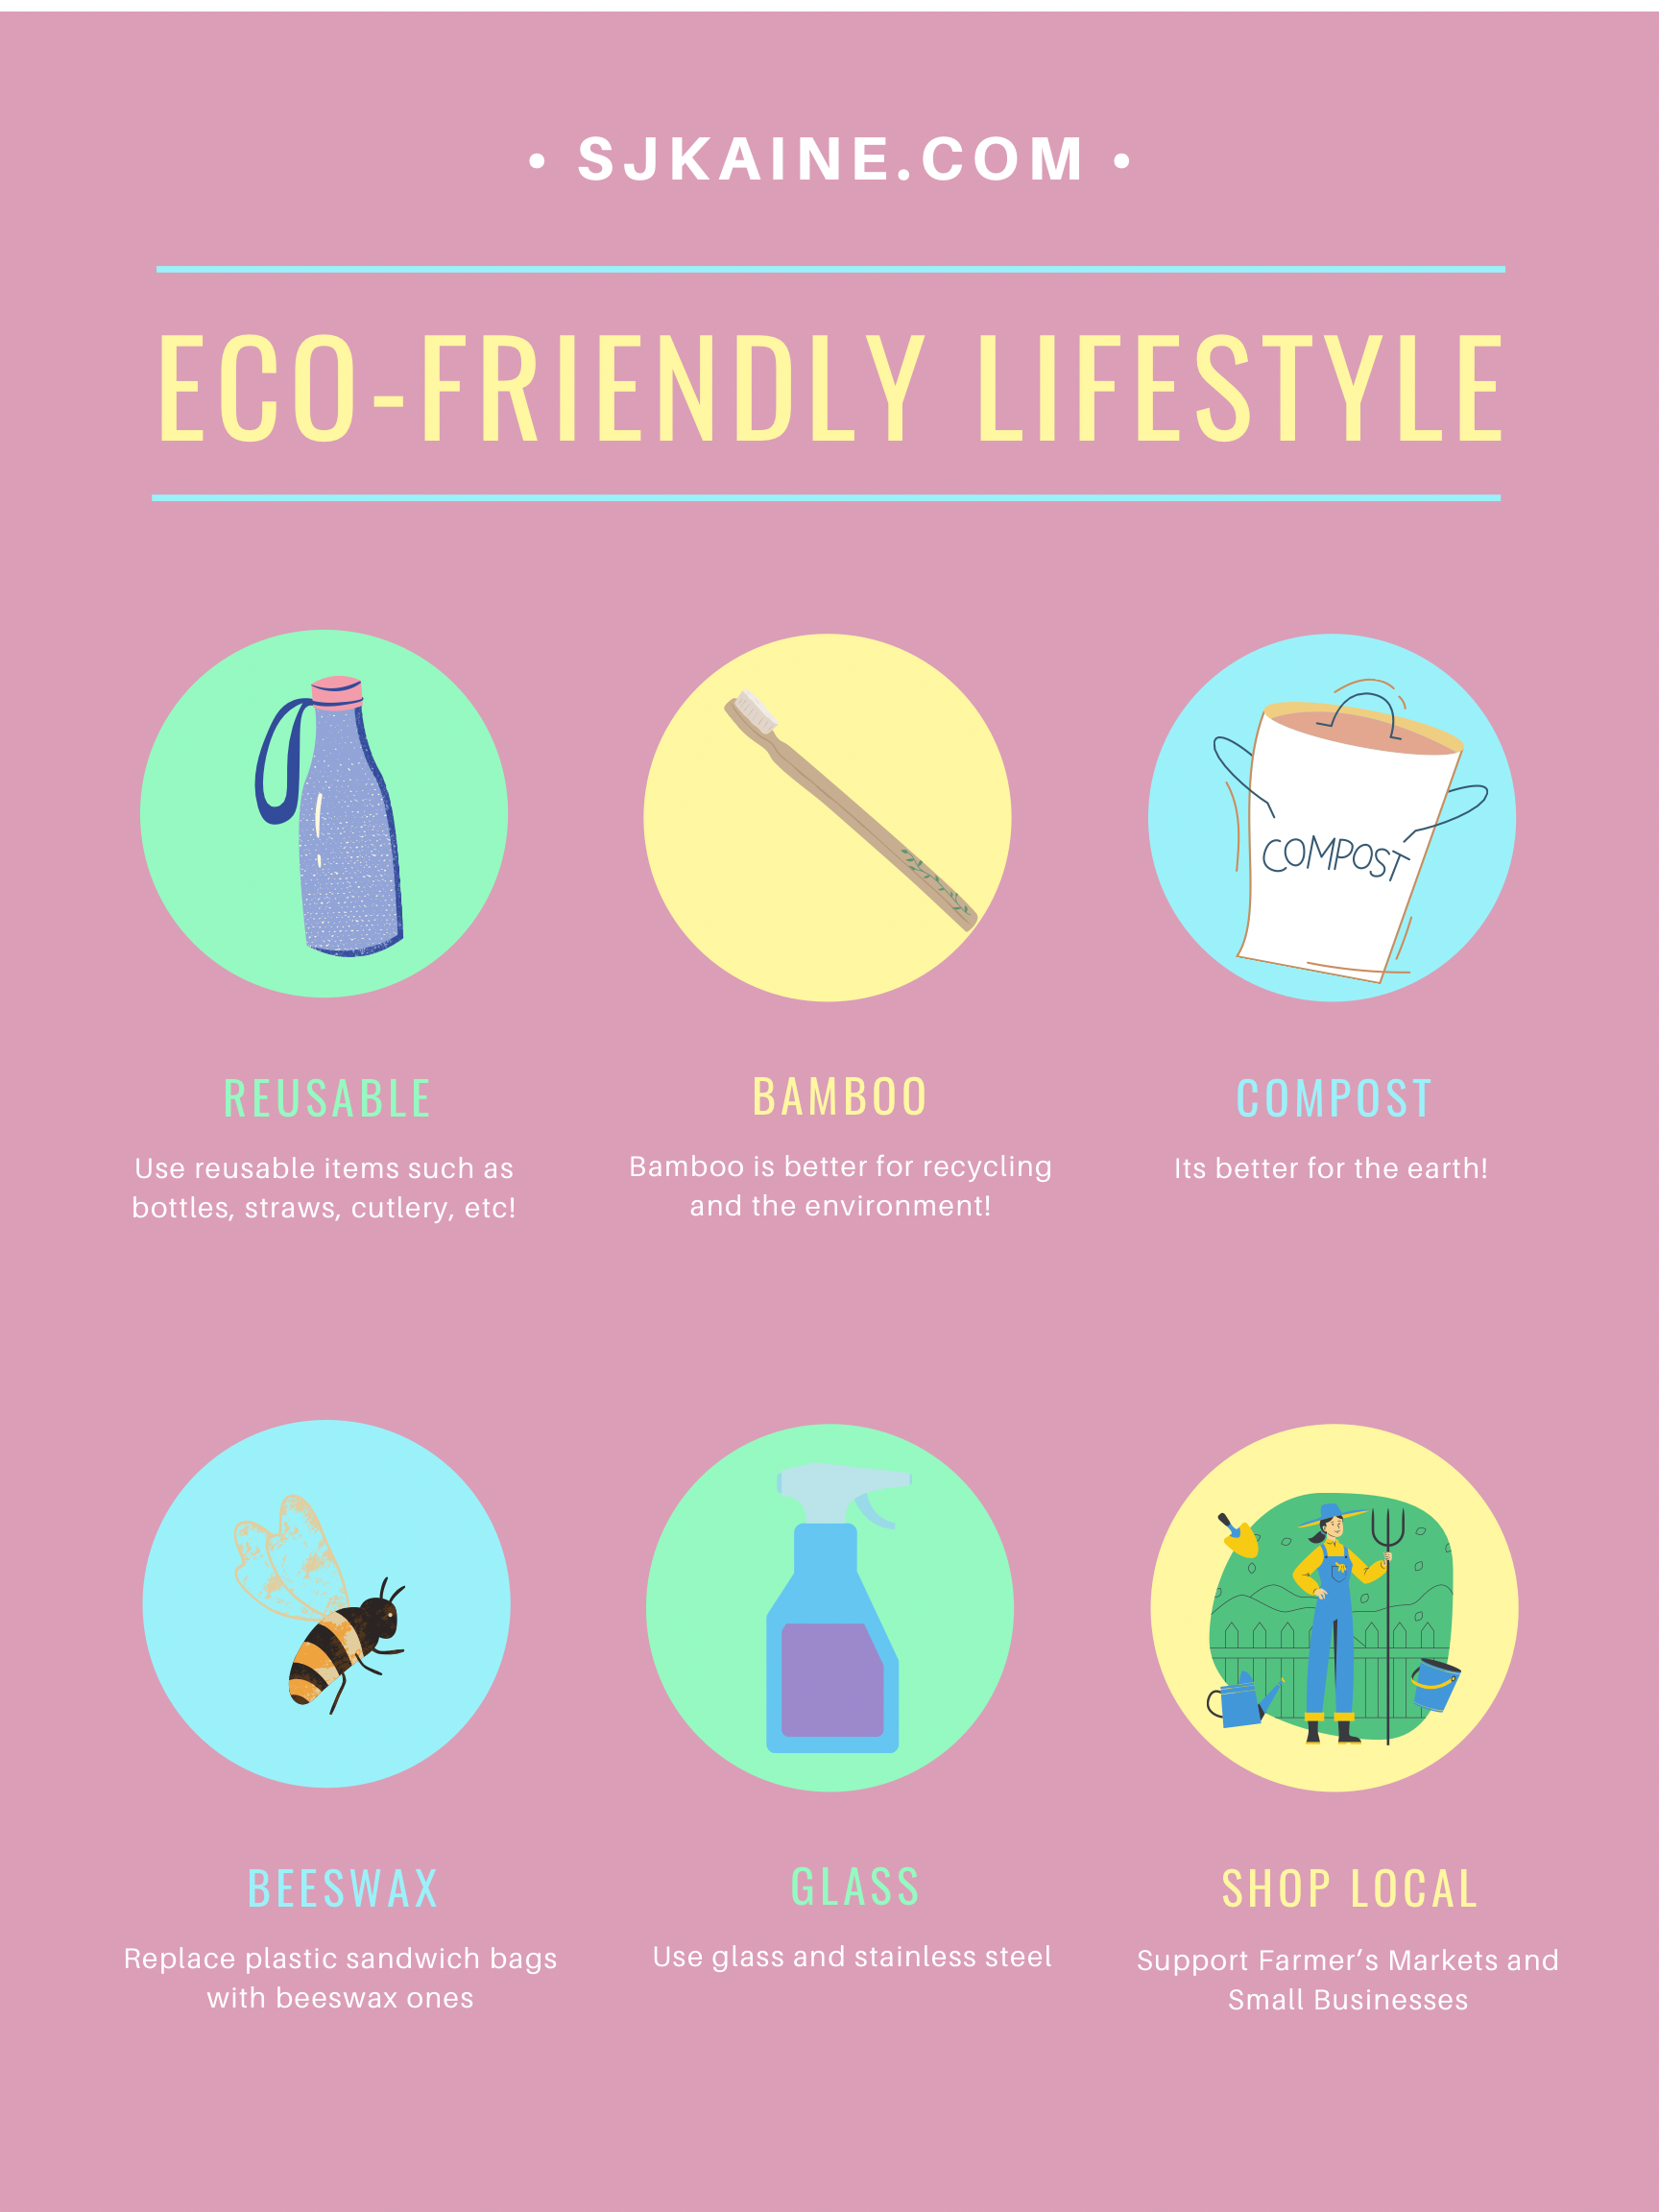 7 Ways To Transition To An Eco-Friendly​ Lifestyle